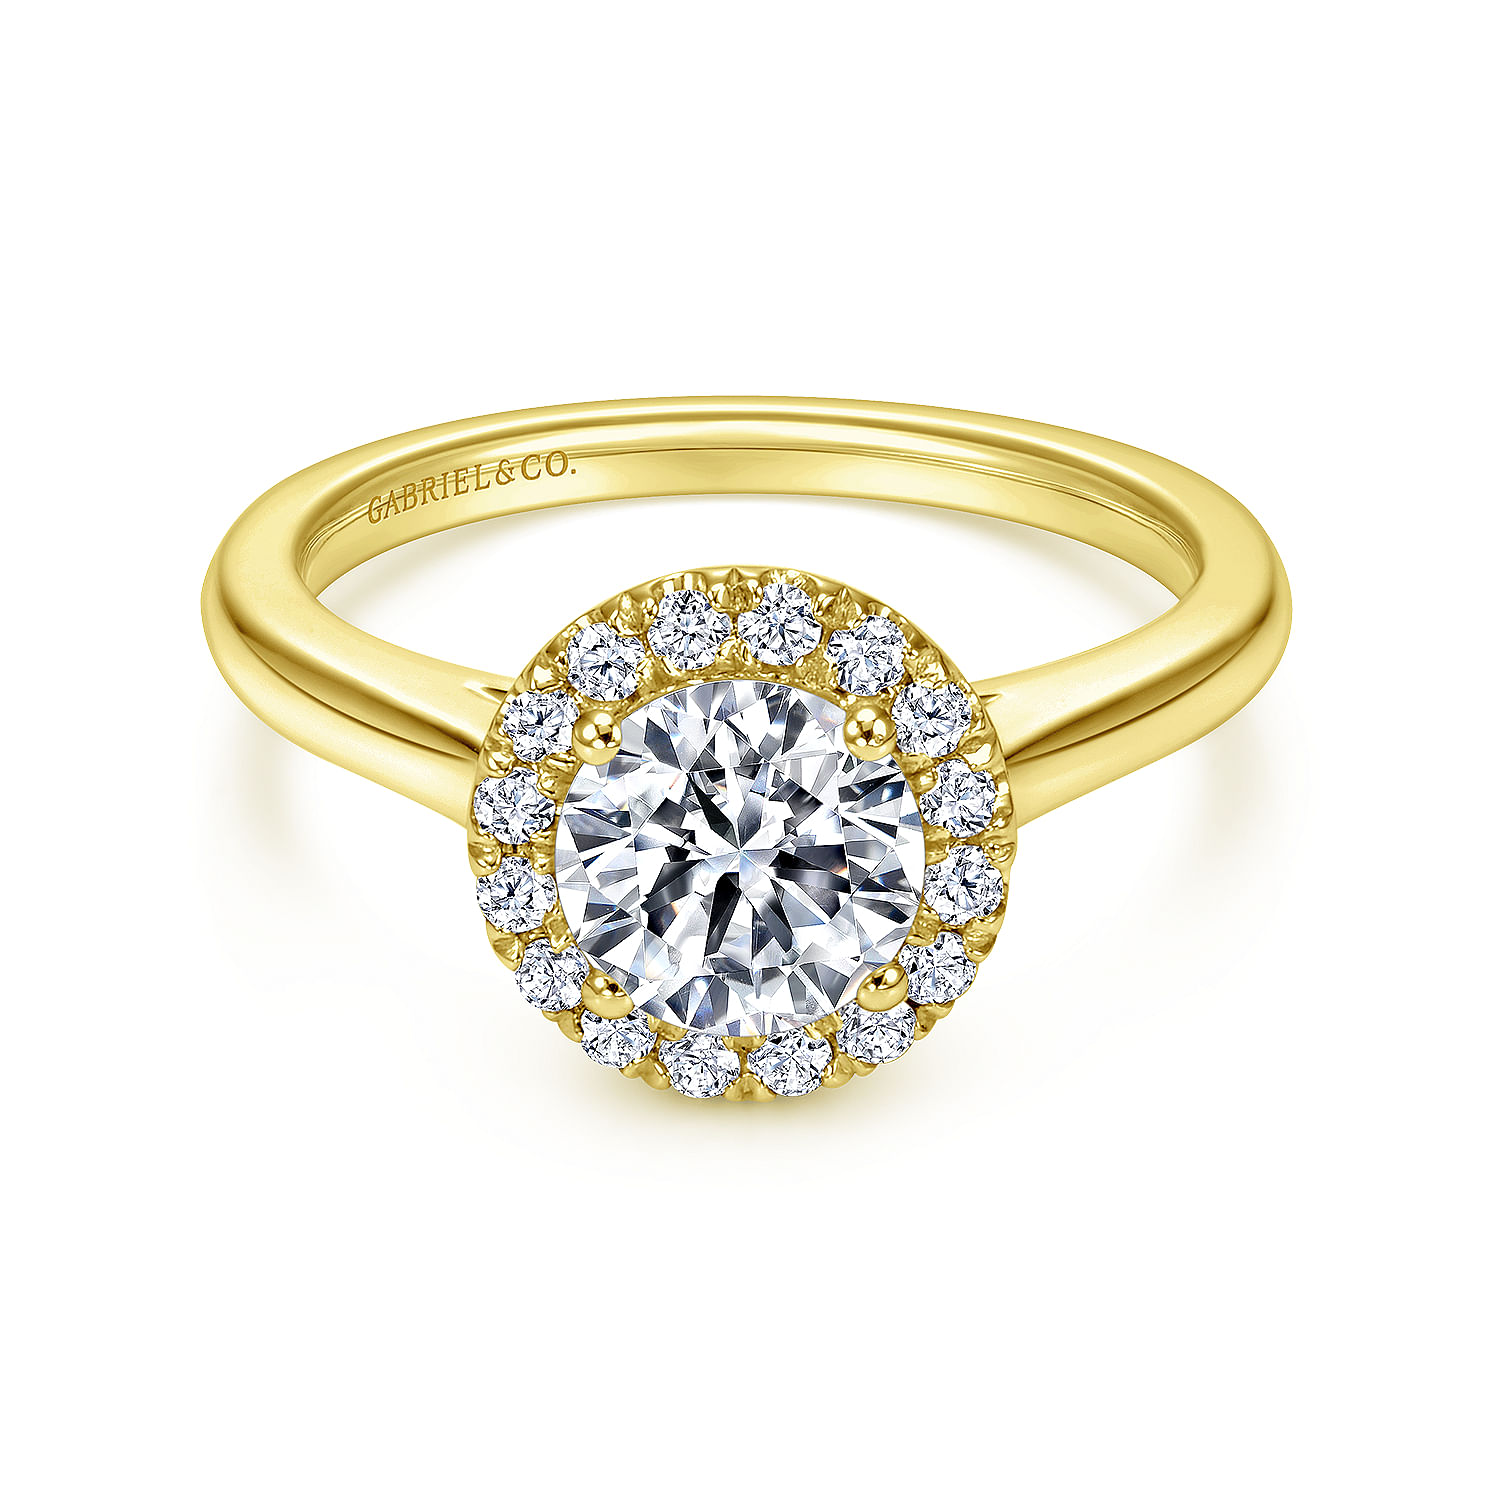 Stacy - 14K Yellow Gold Round Halo Diamond Engagement Ring